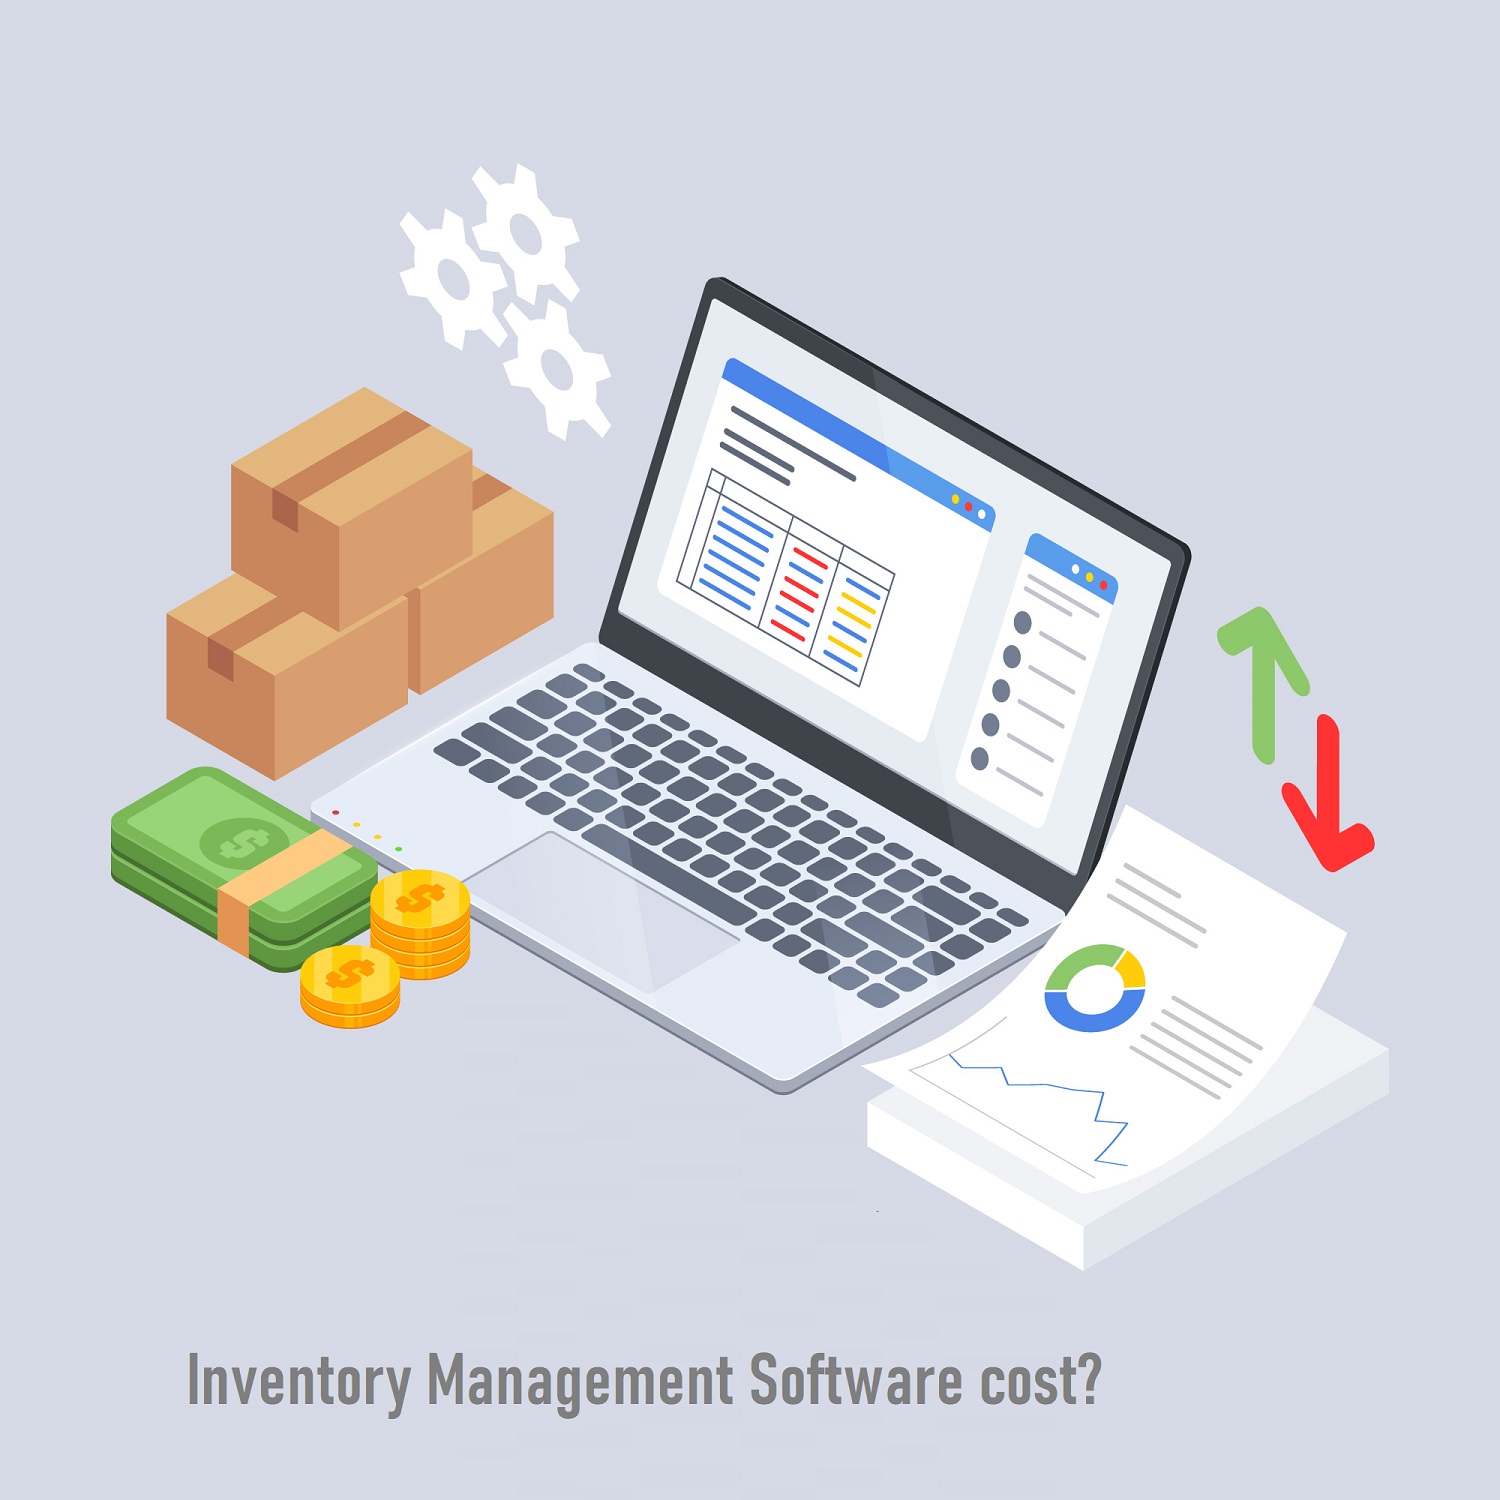 How Much Does Inventory Software Cost?